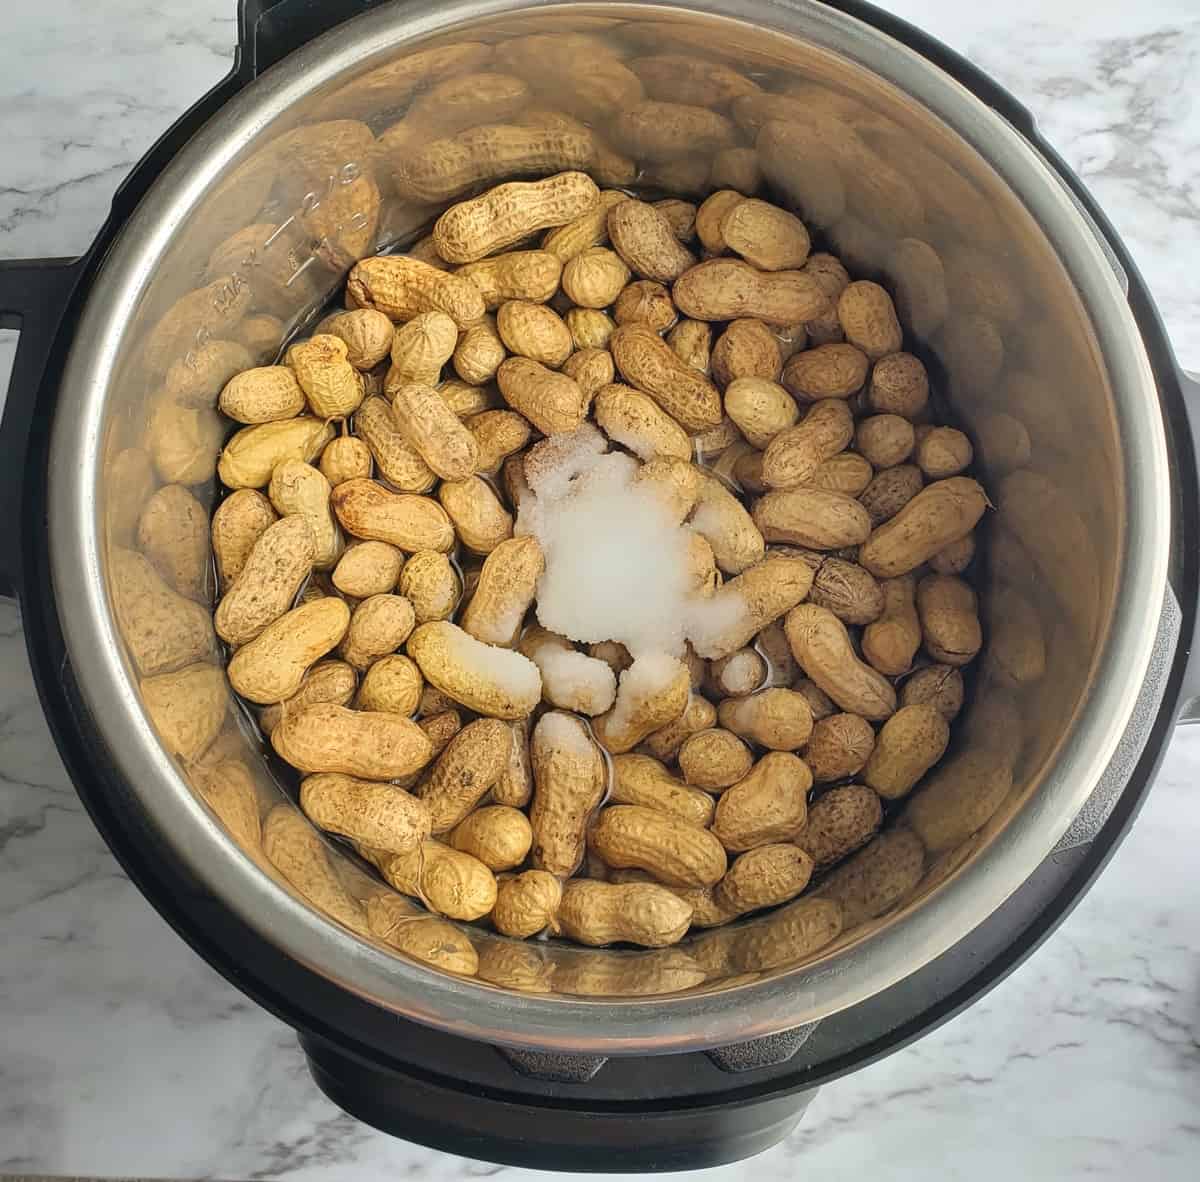 Peanuts in the shell in an Instant Pot with salt in the middle